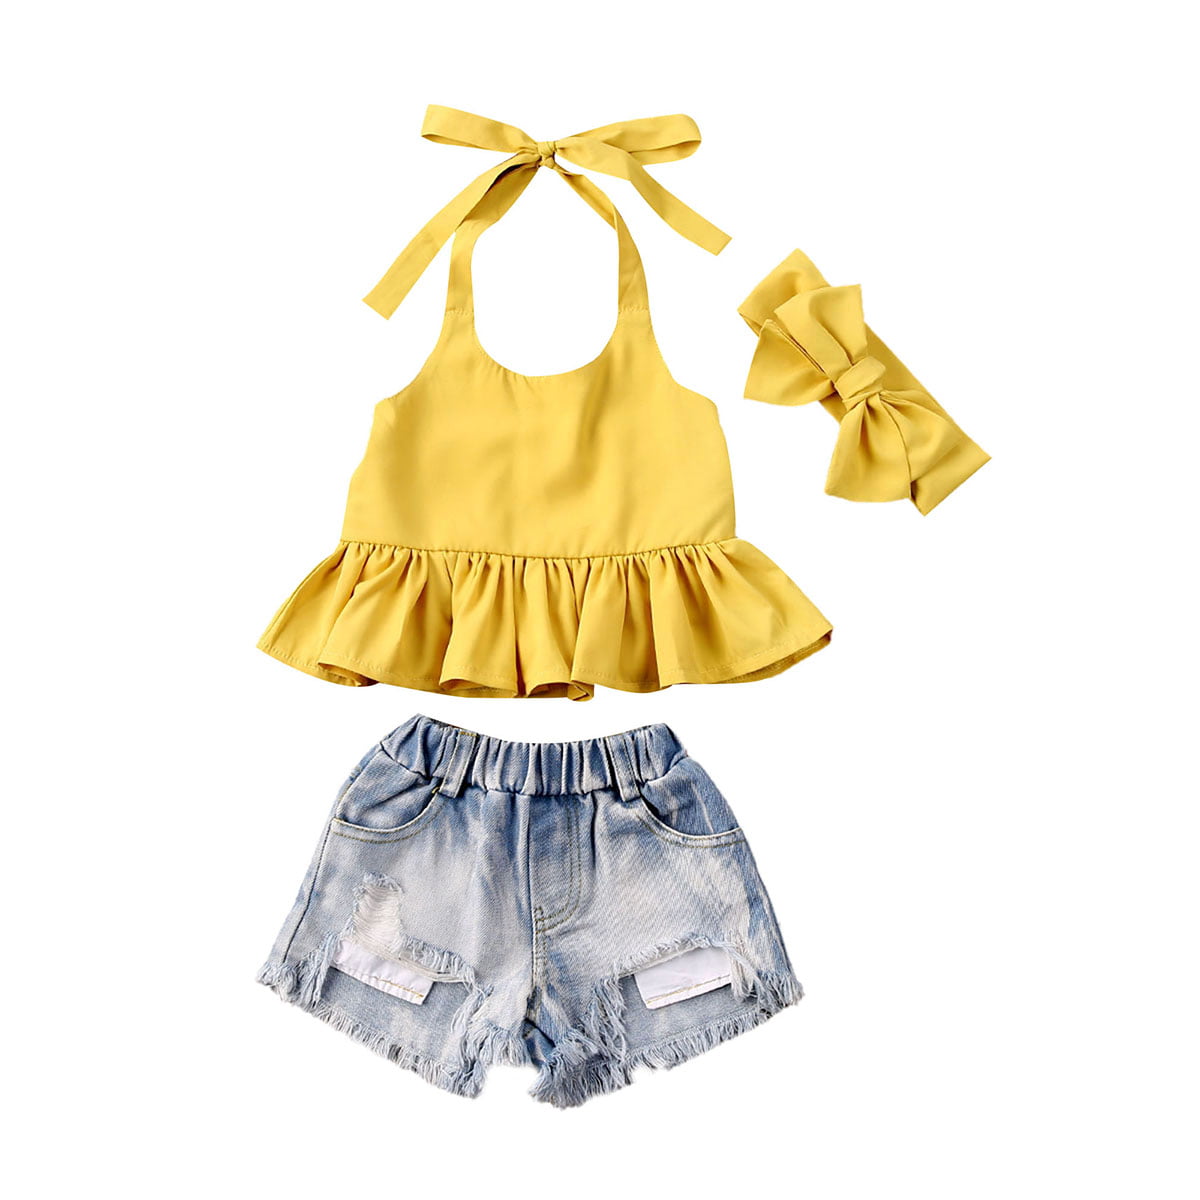 Strappy Sleeveless Swing Top Ruffles Bloomer Pants Set Baby Girl Clothing NB-2Y